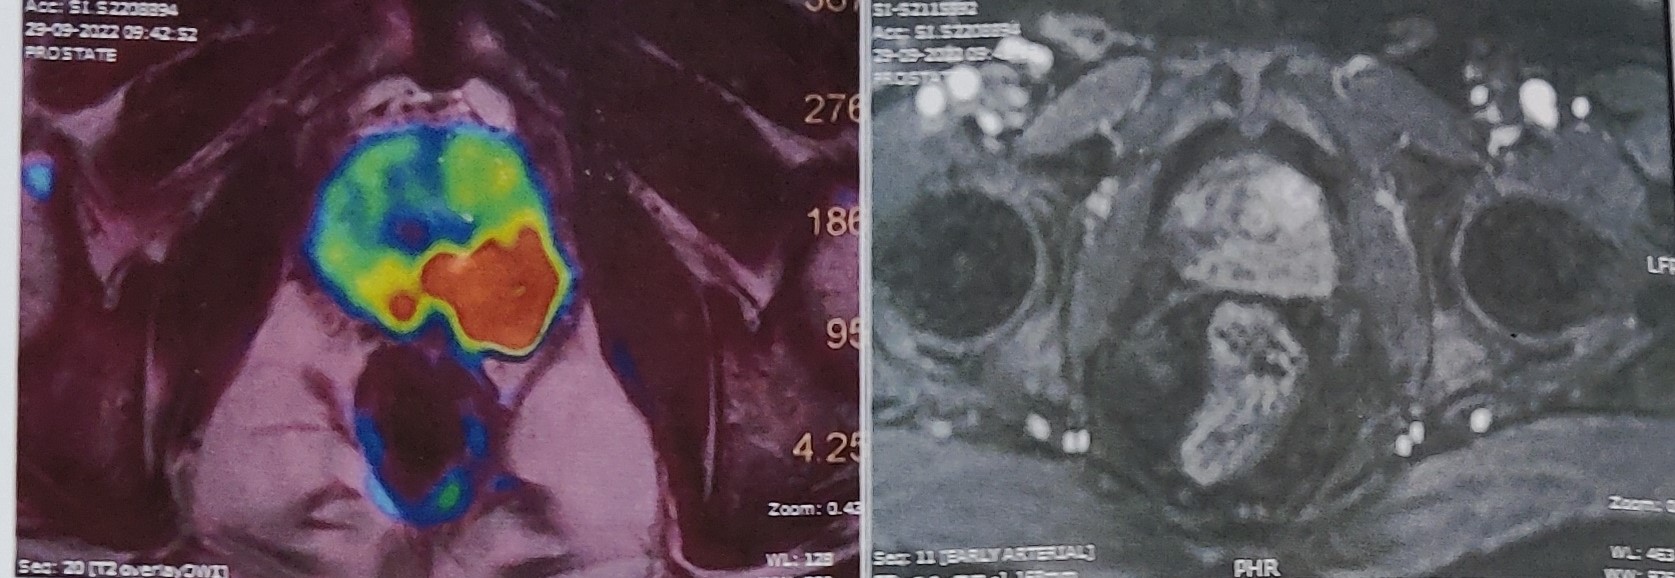 prostate-cancer-mri done by Dr. Varun V. Agarwal, Best Uro-Oncologist and Robotic Surgeon in Vashi, Navi Mumbai.